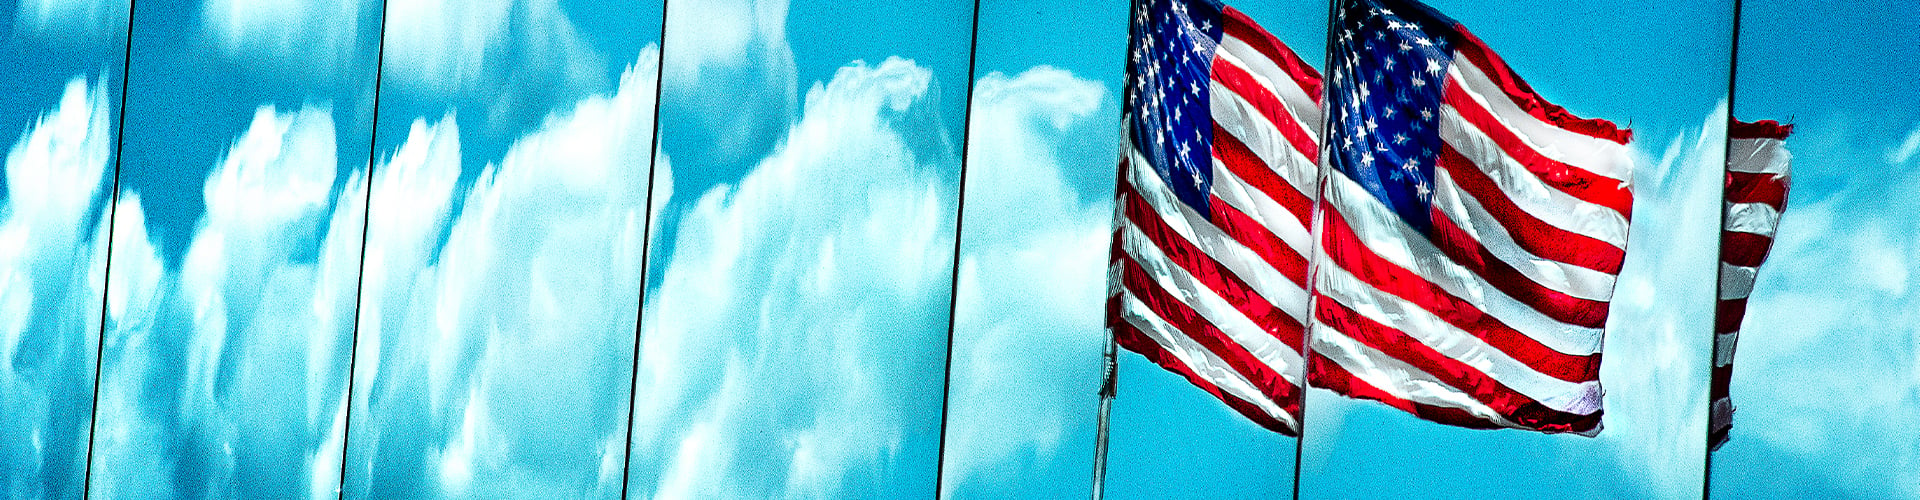 American flag against background of flags